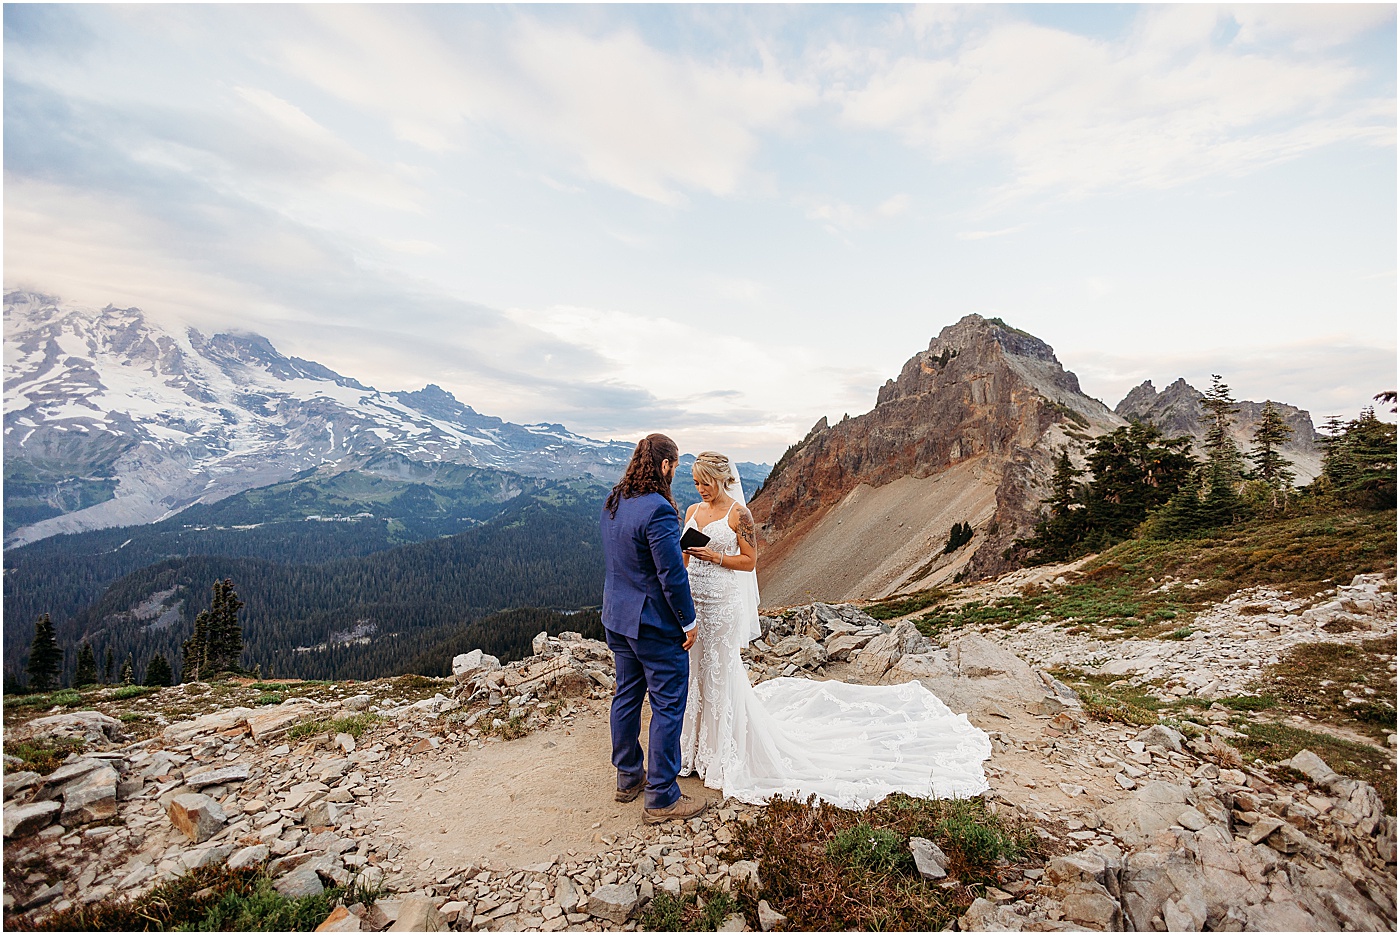 Couple exchanging vows during intimate elopement at Mount Rainier | Photo by Megan Montalvo Photography